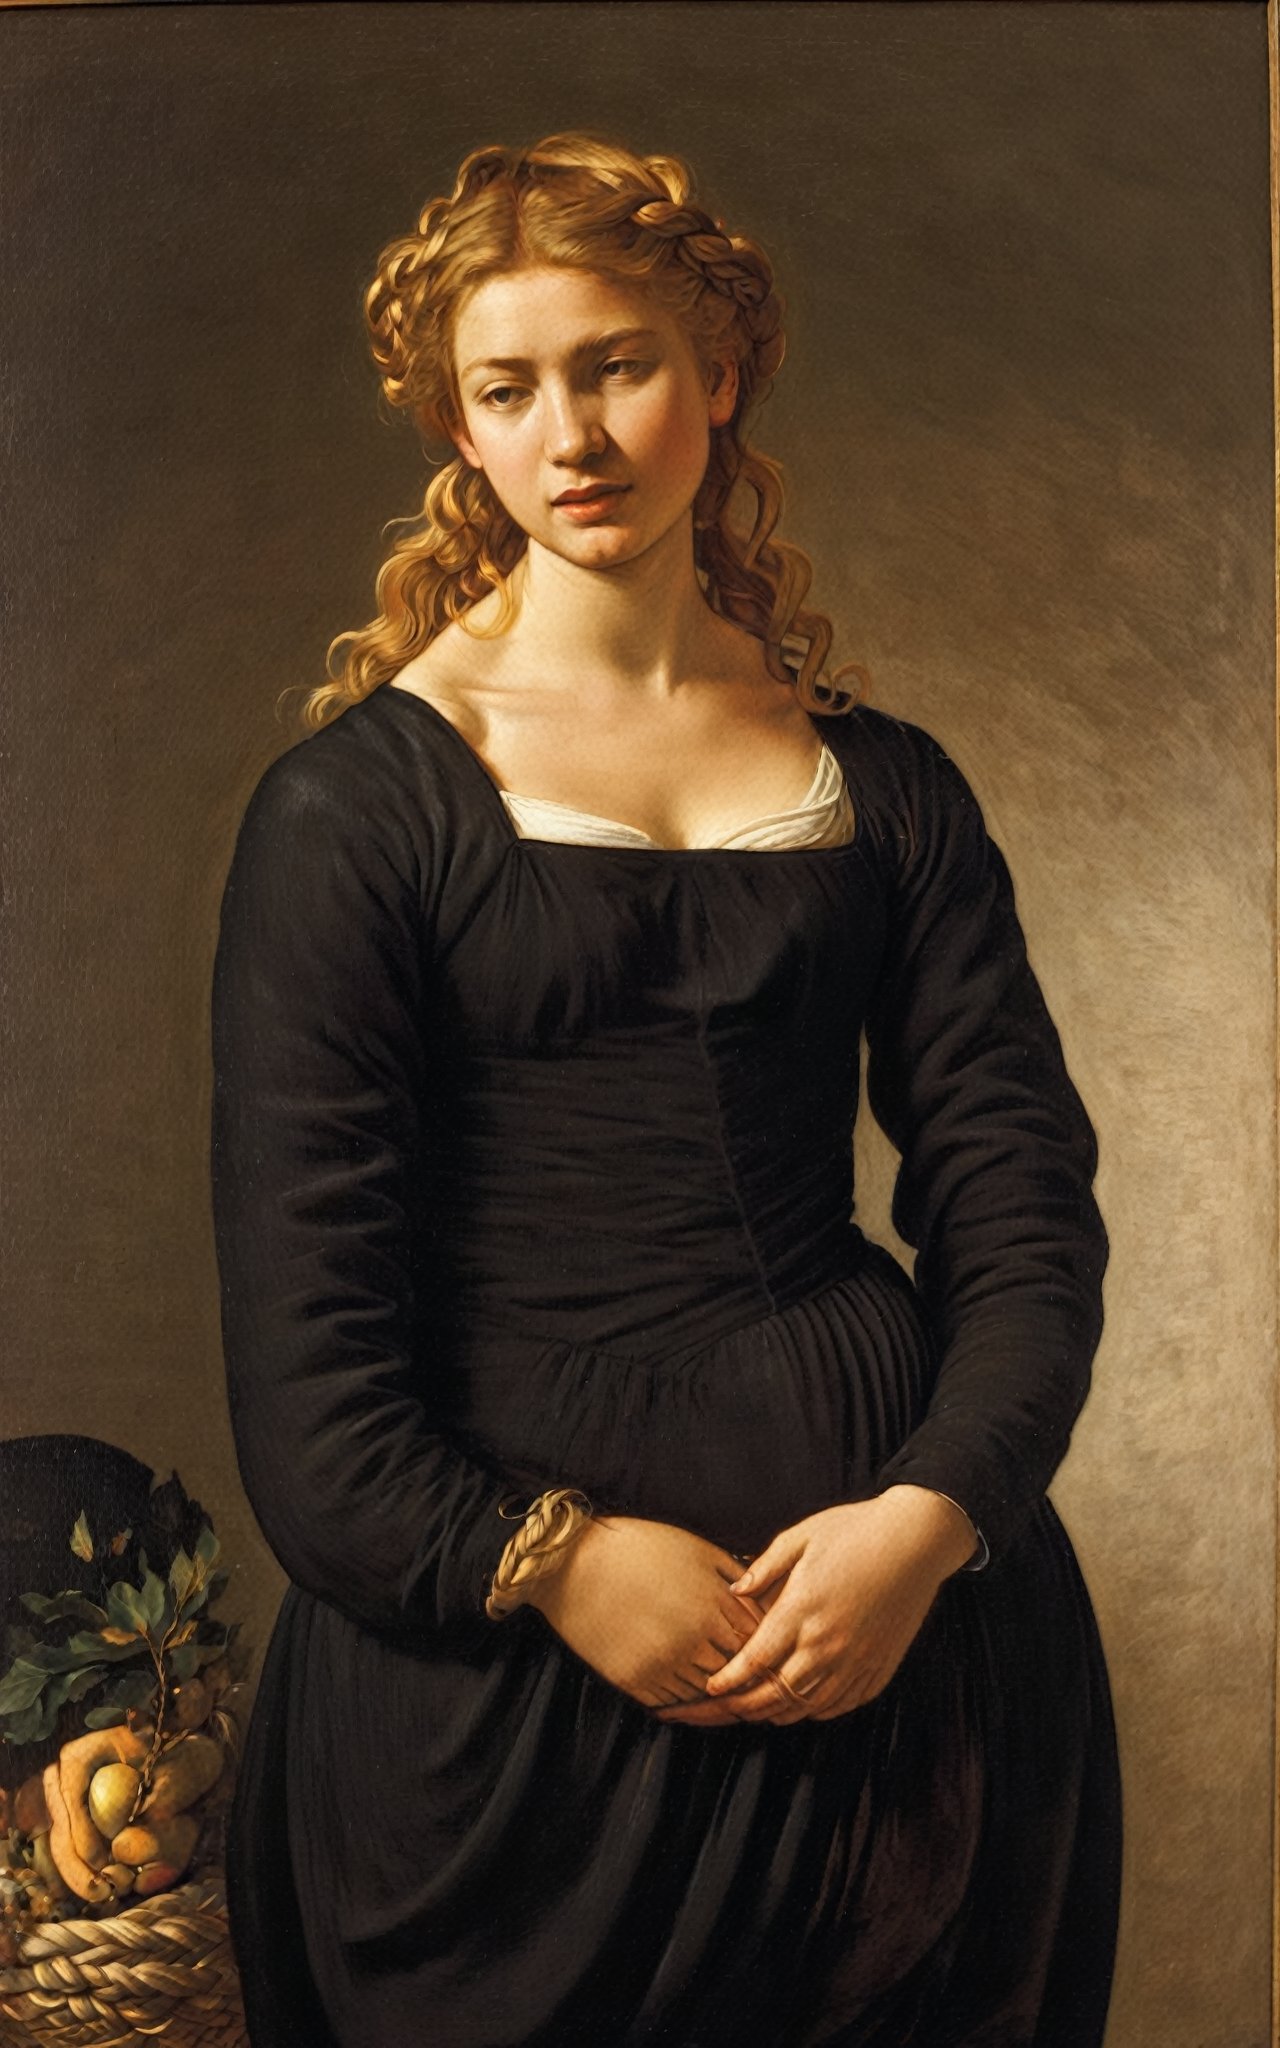 A serene portrait of a peasant girl, 18yo, with long, golden blonde hair, stands tall in a simple homespun dress, its heavy fabric shimmering under warm, golden light. Framed from the waist up, her flowing homespun and braided locks take center stage. The soft glow highlights the gentle curves of her face and subtle smile, as if captured in a fleeting moment of quiet contemplation. Oil on canvas by Caravaggio ca 1600